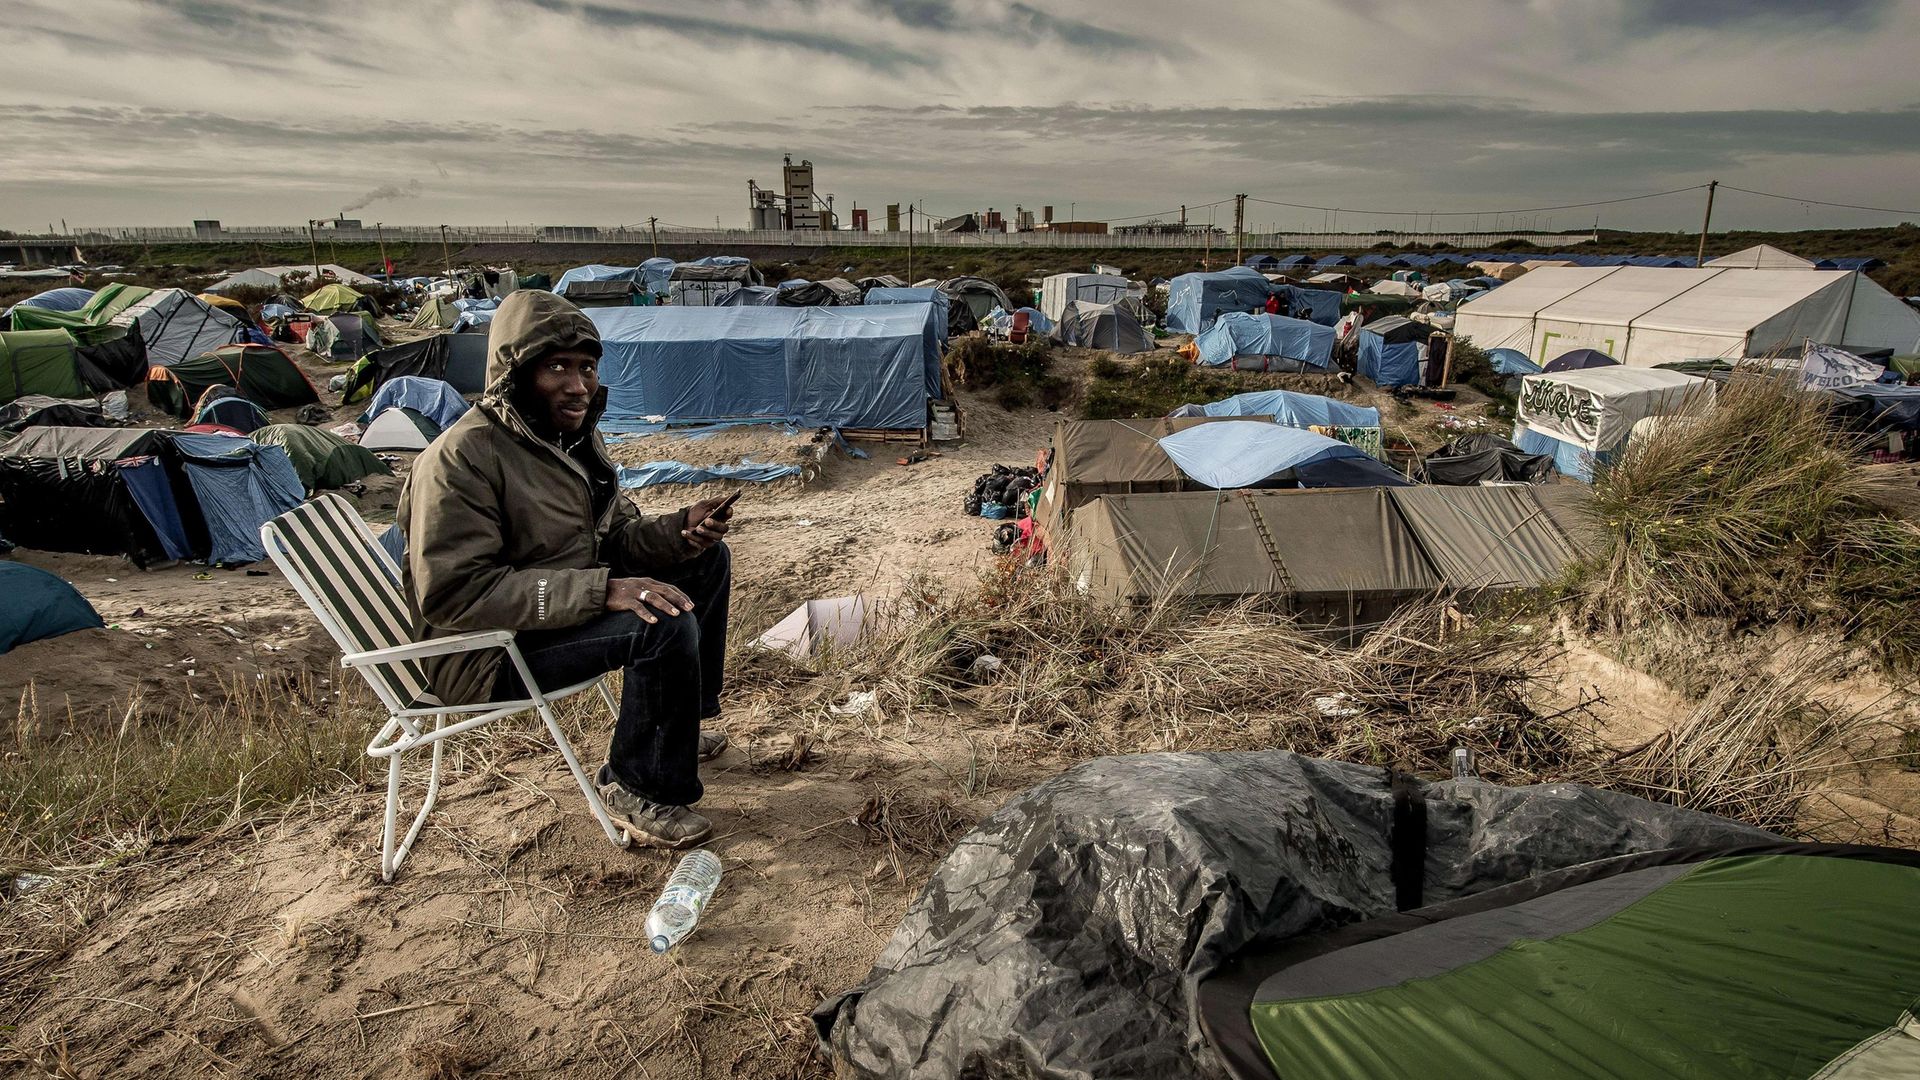 A Sudanese man looks on as he uses a phone to call his family in the "Jungle" migrants camp in Calais - Credit: PHILIPPE HUGUEN/AFP via Getty Images